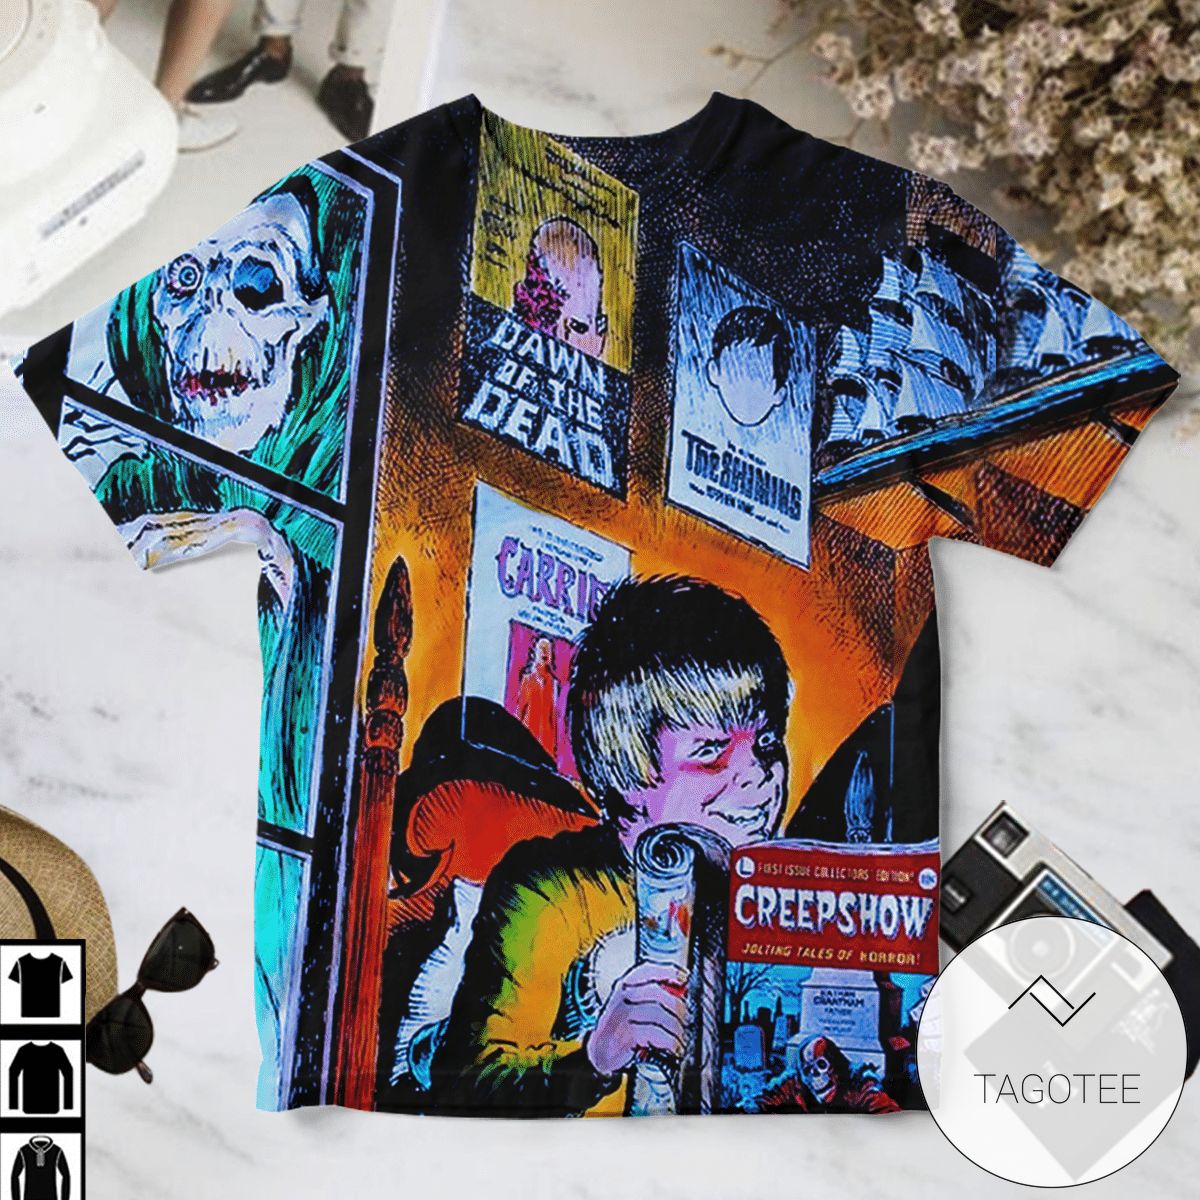 Creepshow Book By Stephen King Cover Shirt